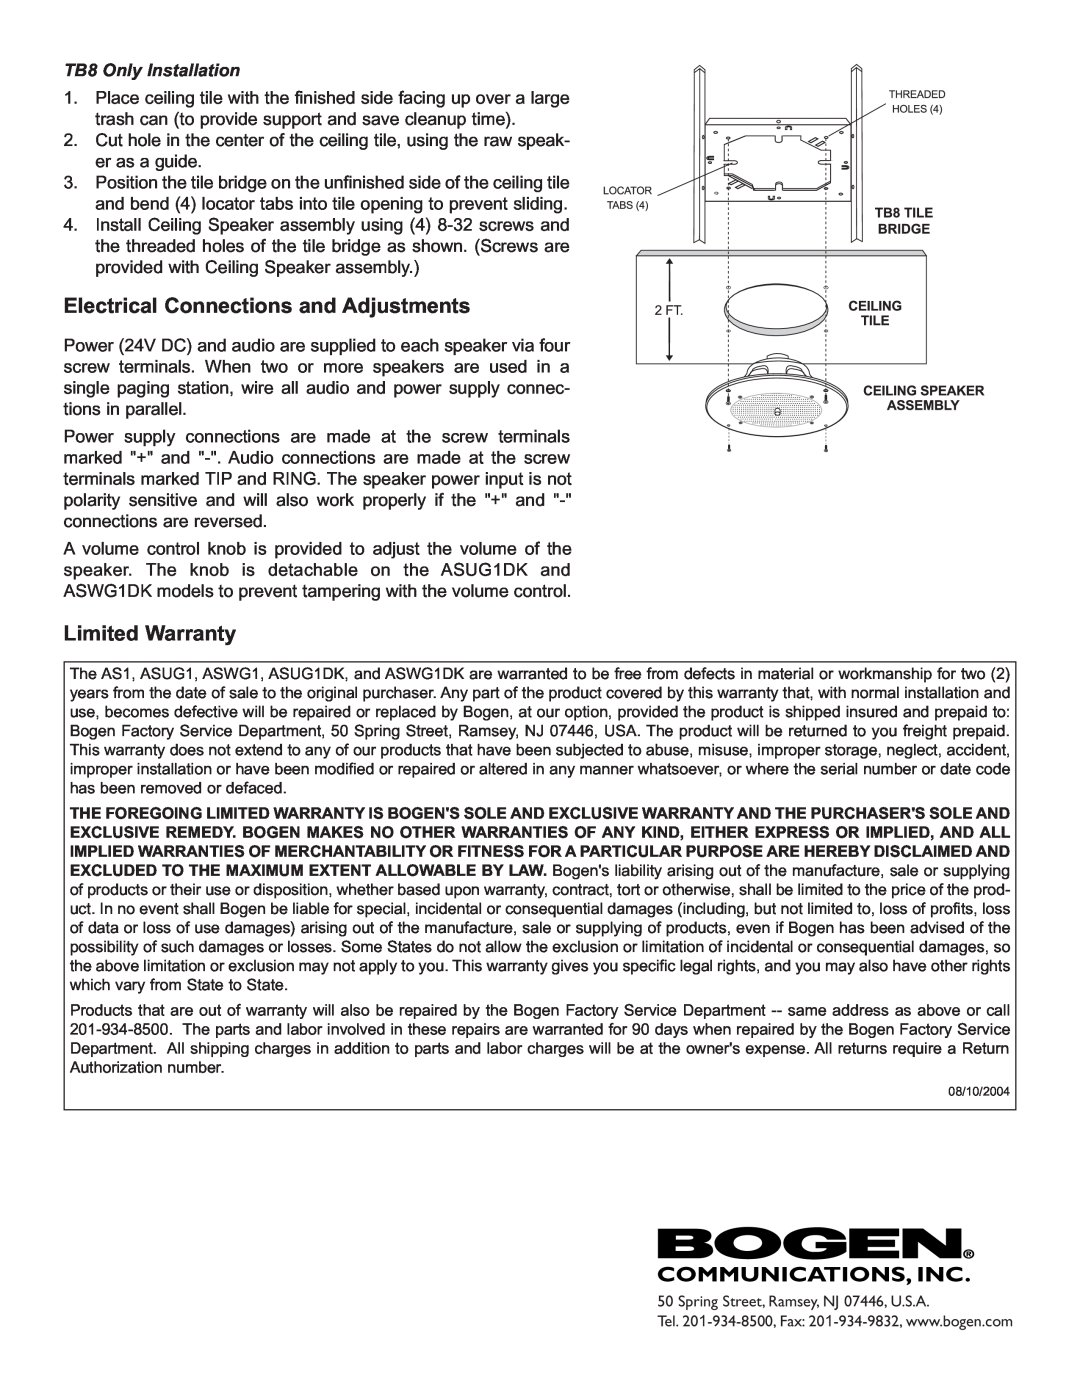 Bogen ASUG1DK installation instructions Electrical Connections and Adjustments, Limited Warranty, TB8 Only Installation 